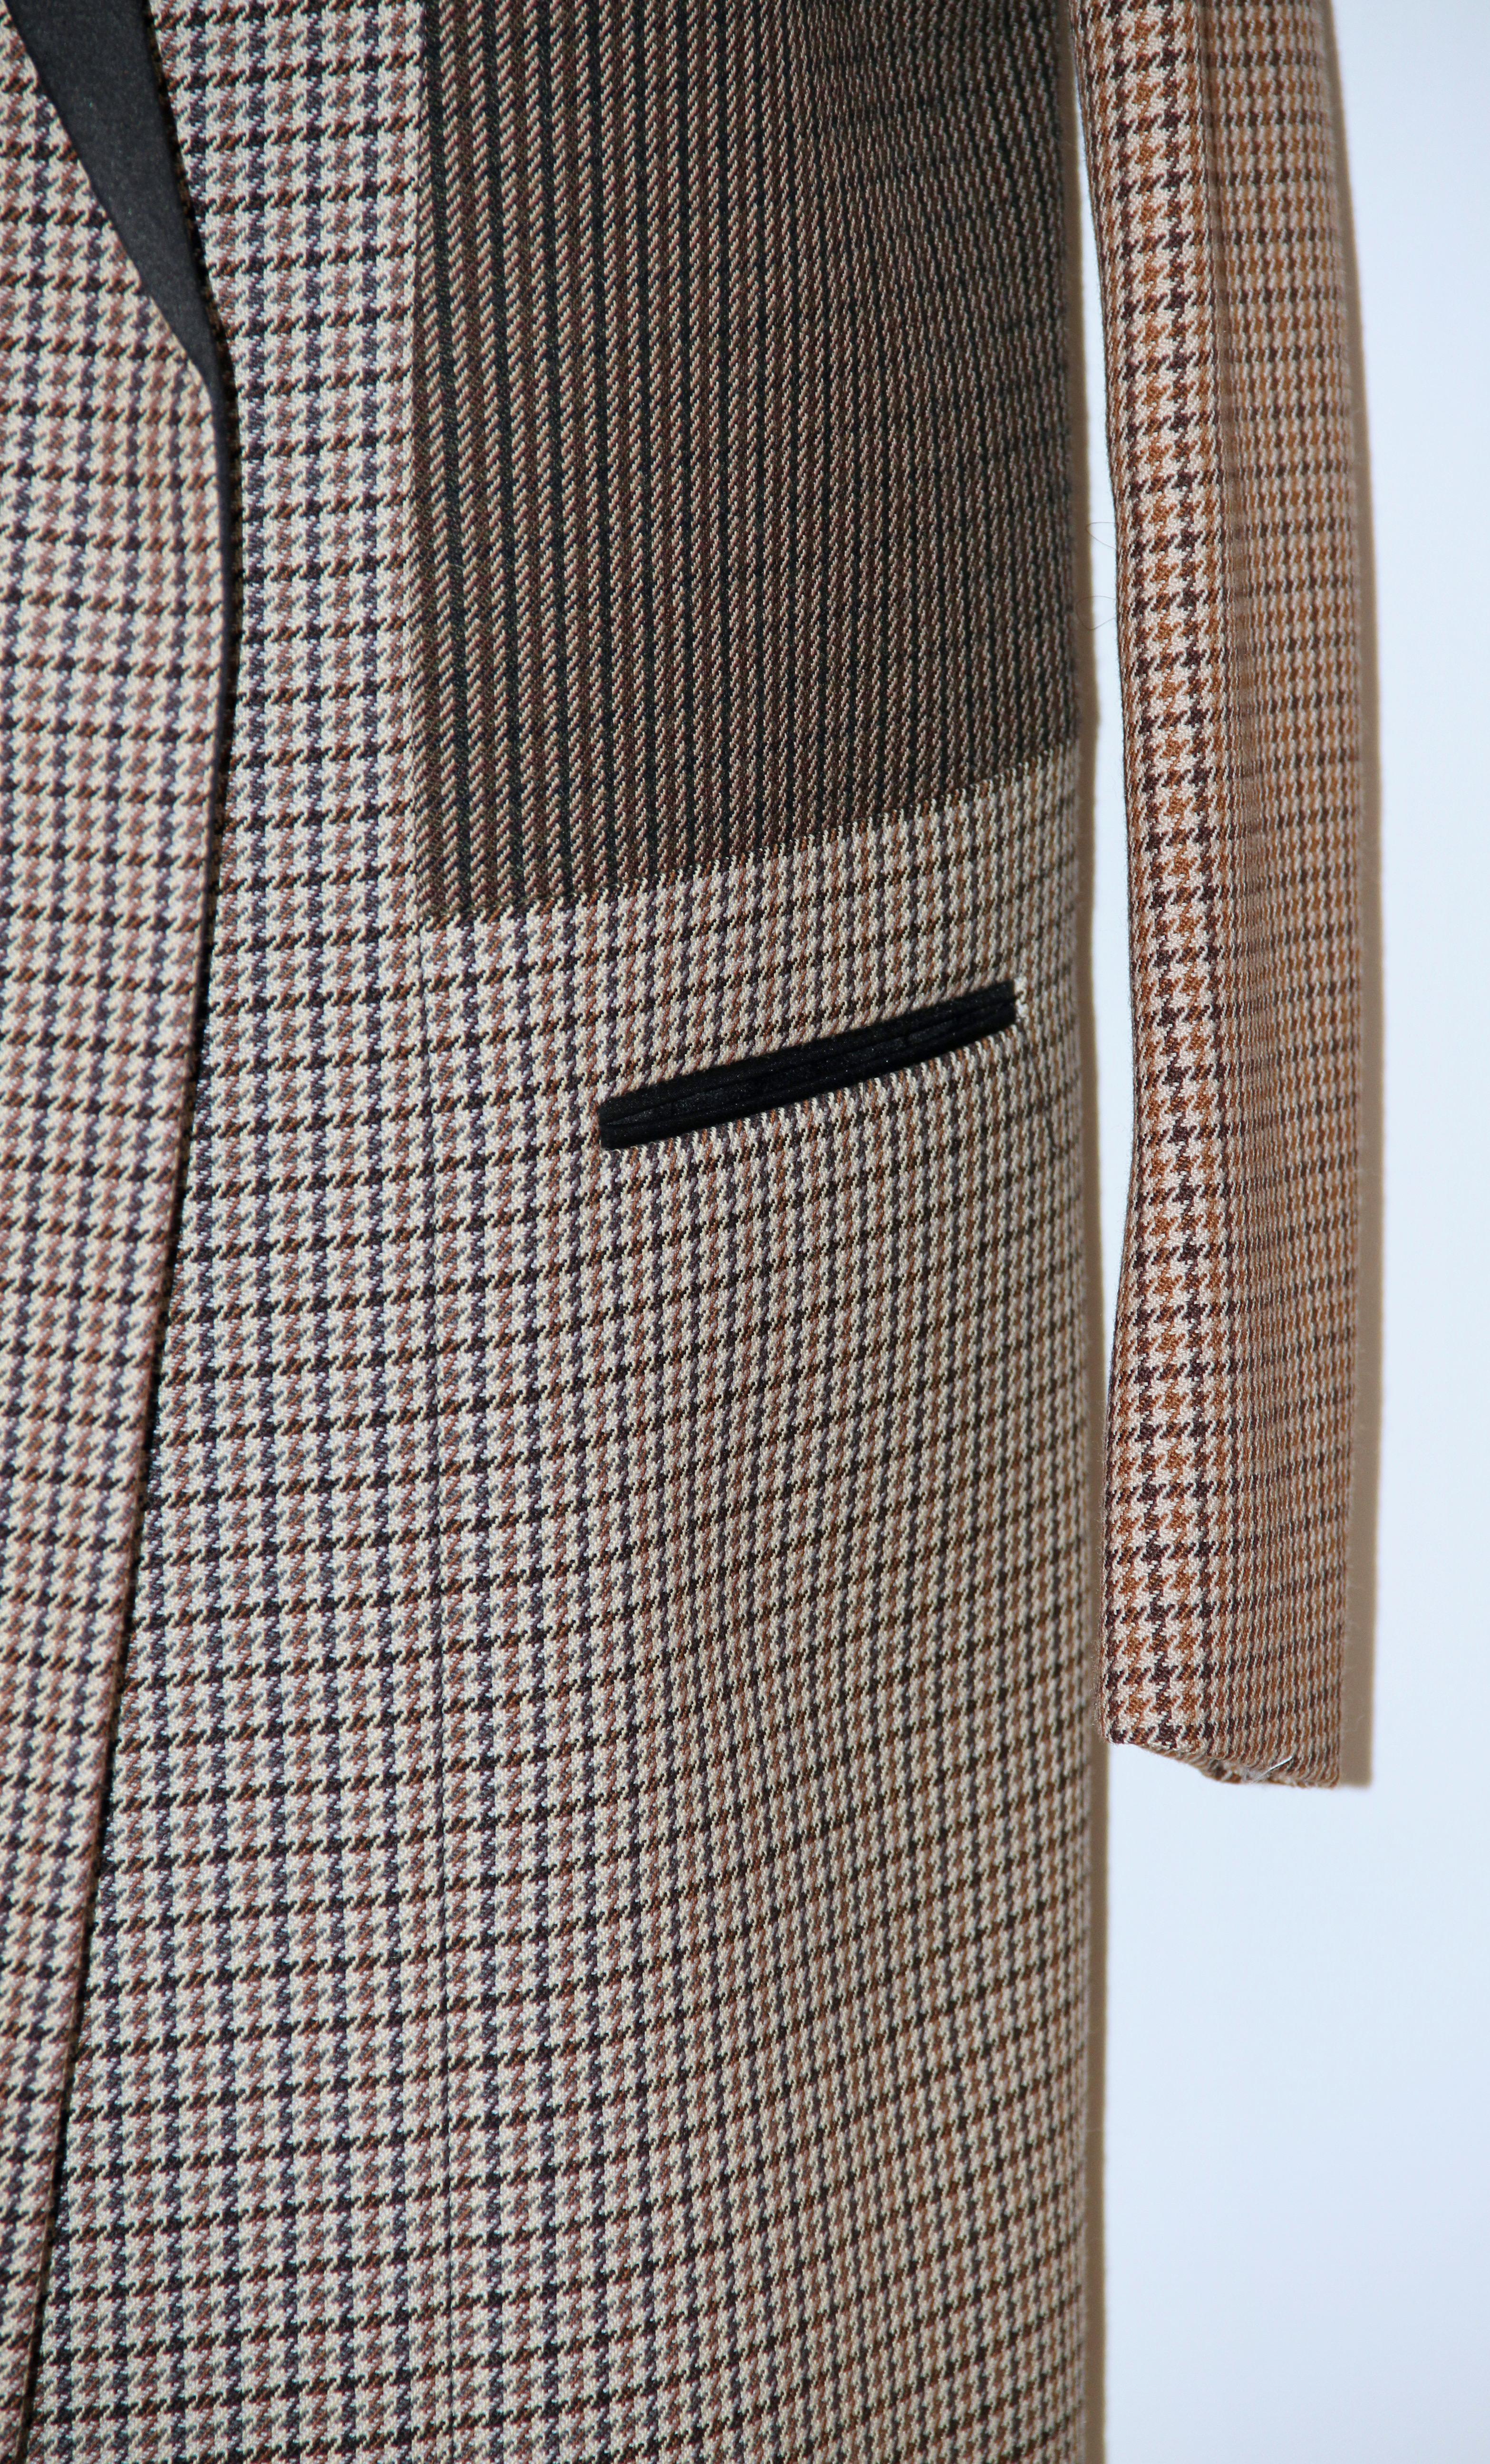 Céline Pre Fall 2011 Houndstooth Coat by Phoebe Philo 2